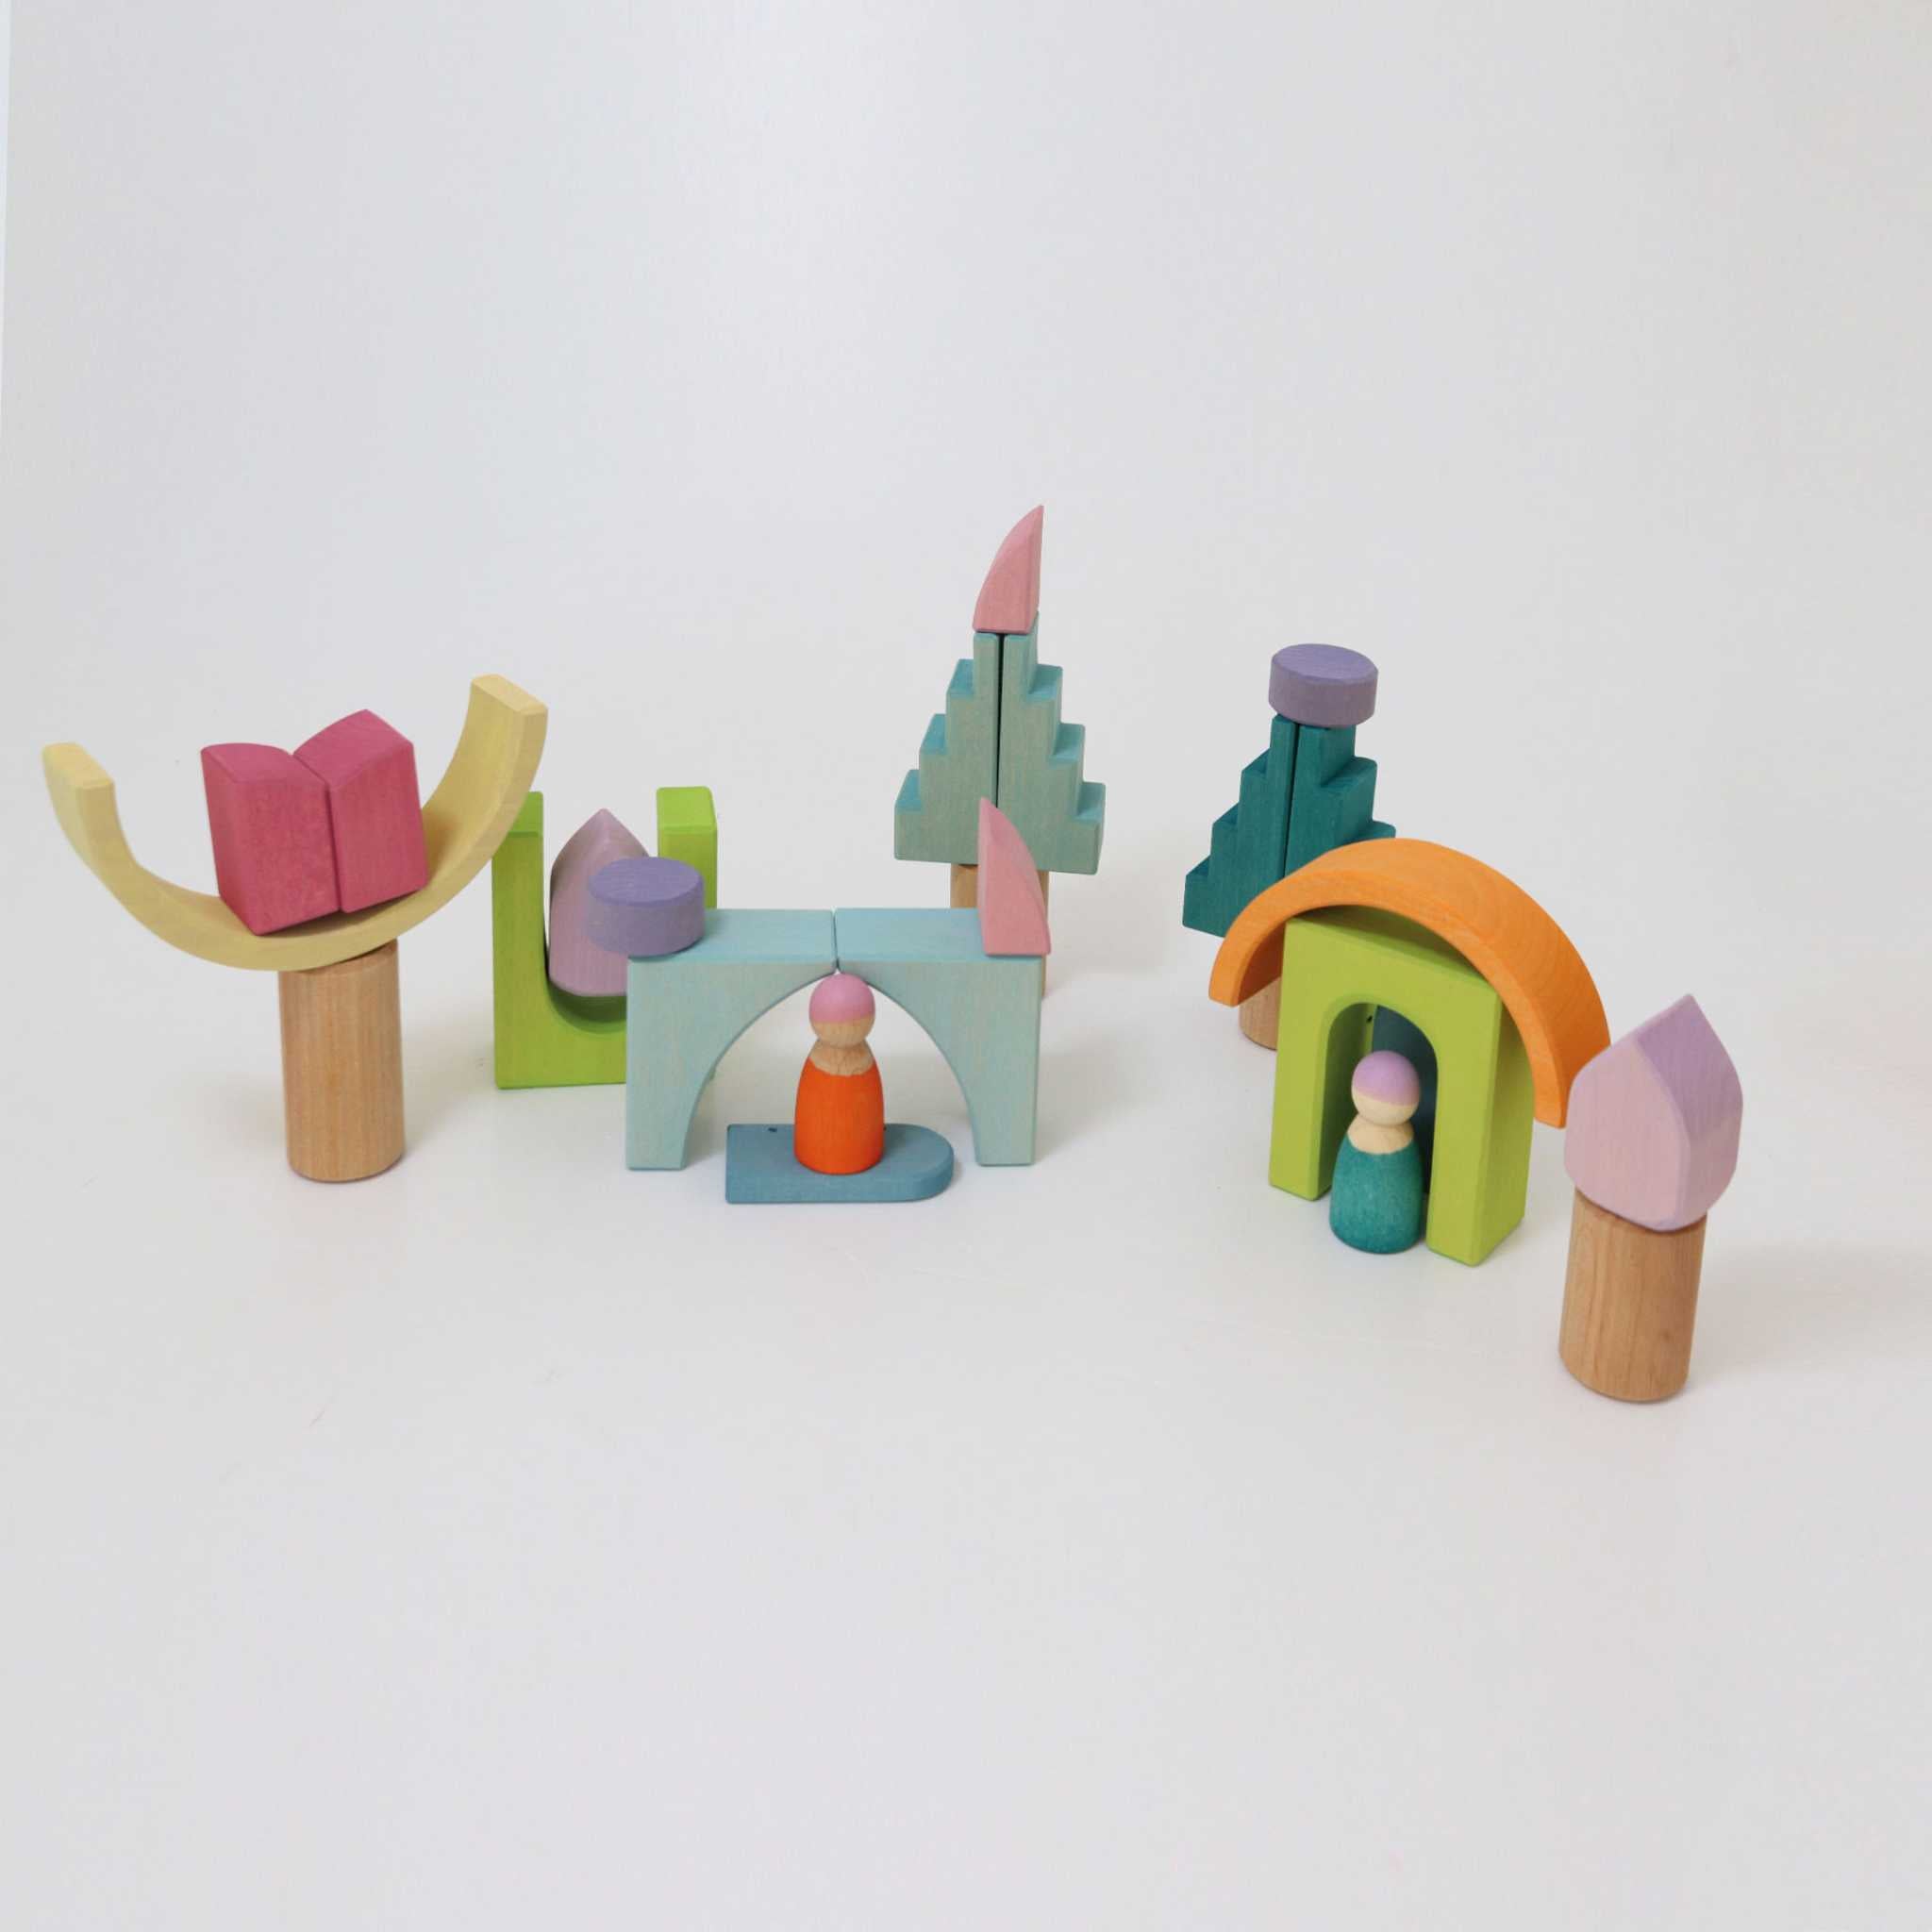 Grimm's Cloud Play Building World Set - Arranged as Trees & Houses